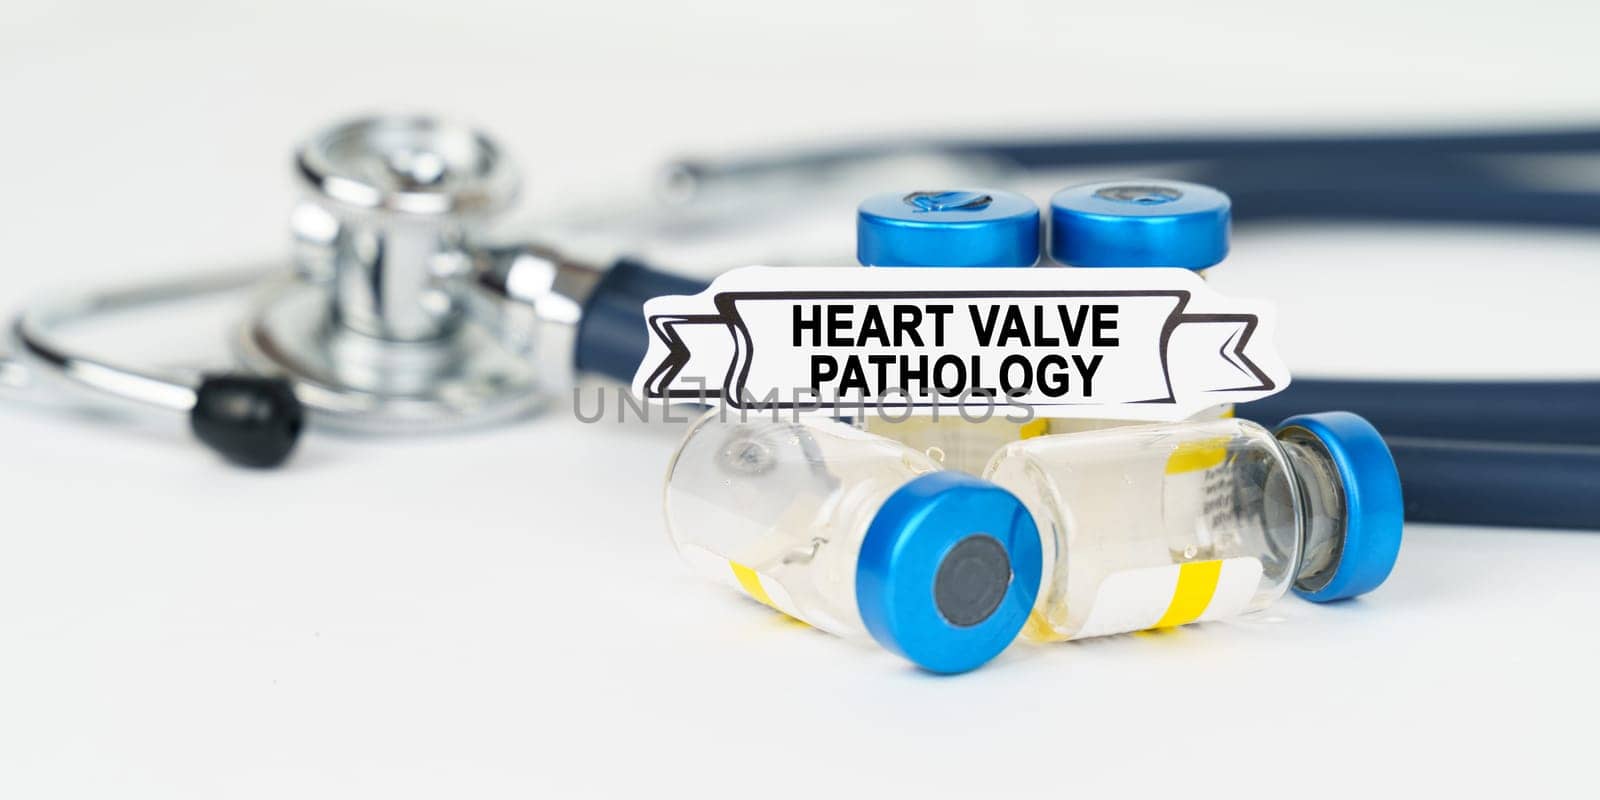 Medical concept. On the table there is a stethoscope, injections and a sign with the inscription - heart valve pathology